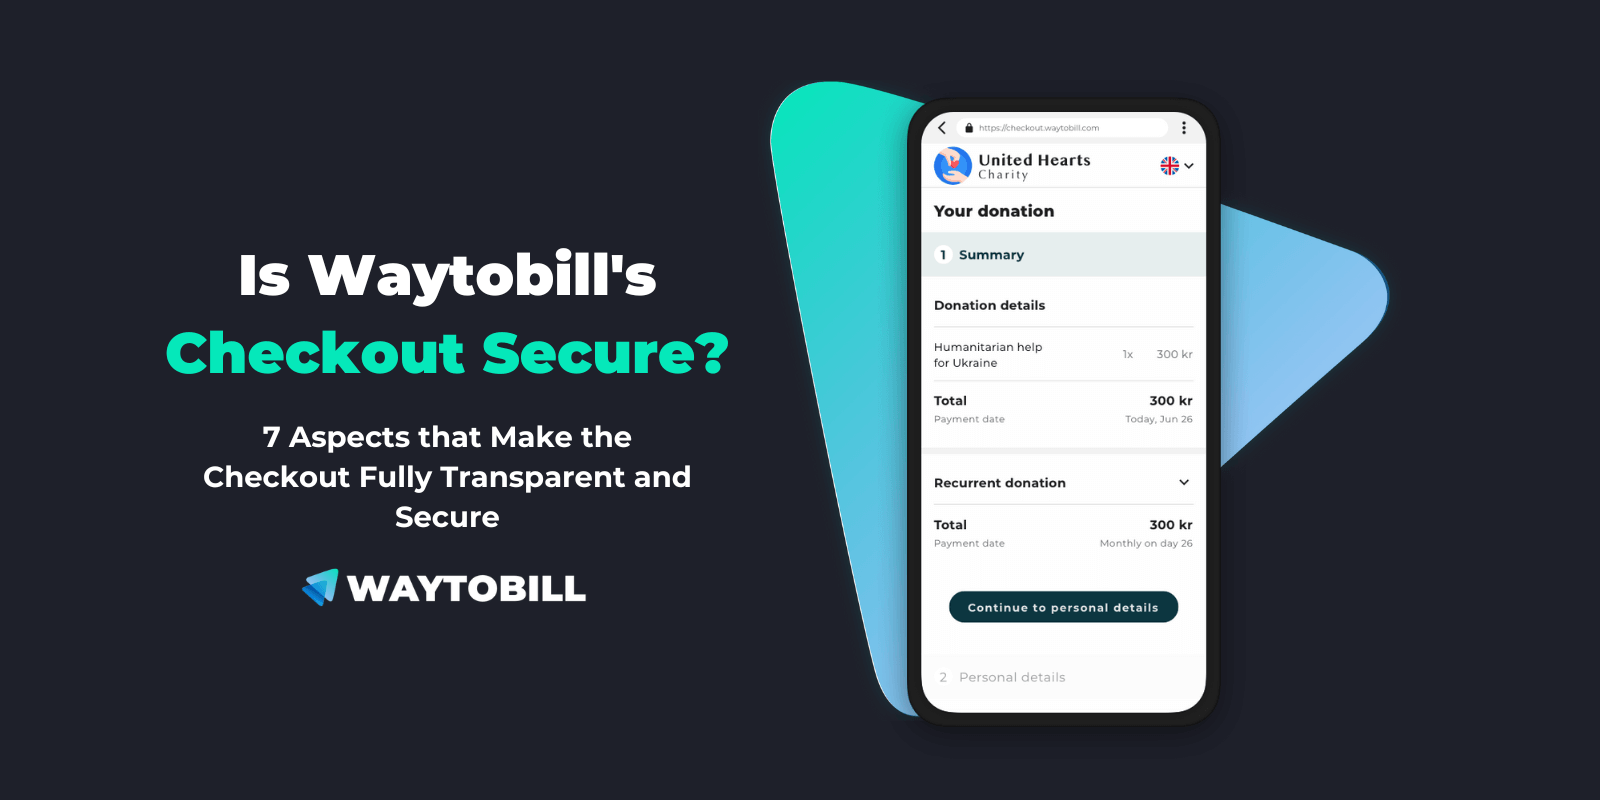 7 Features that Make the Waytobill Checkout Secure and Transparent